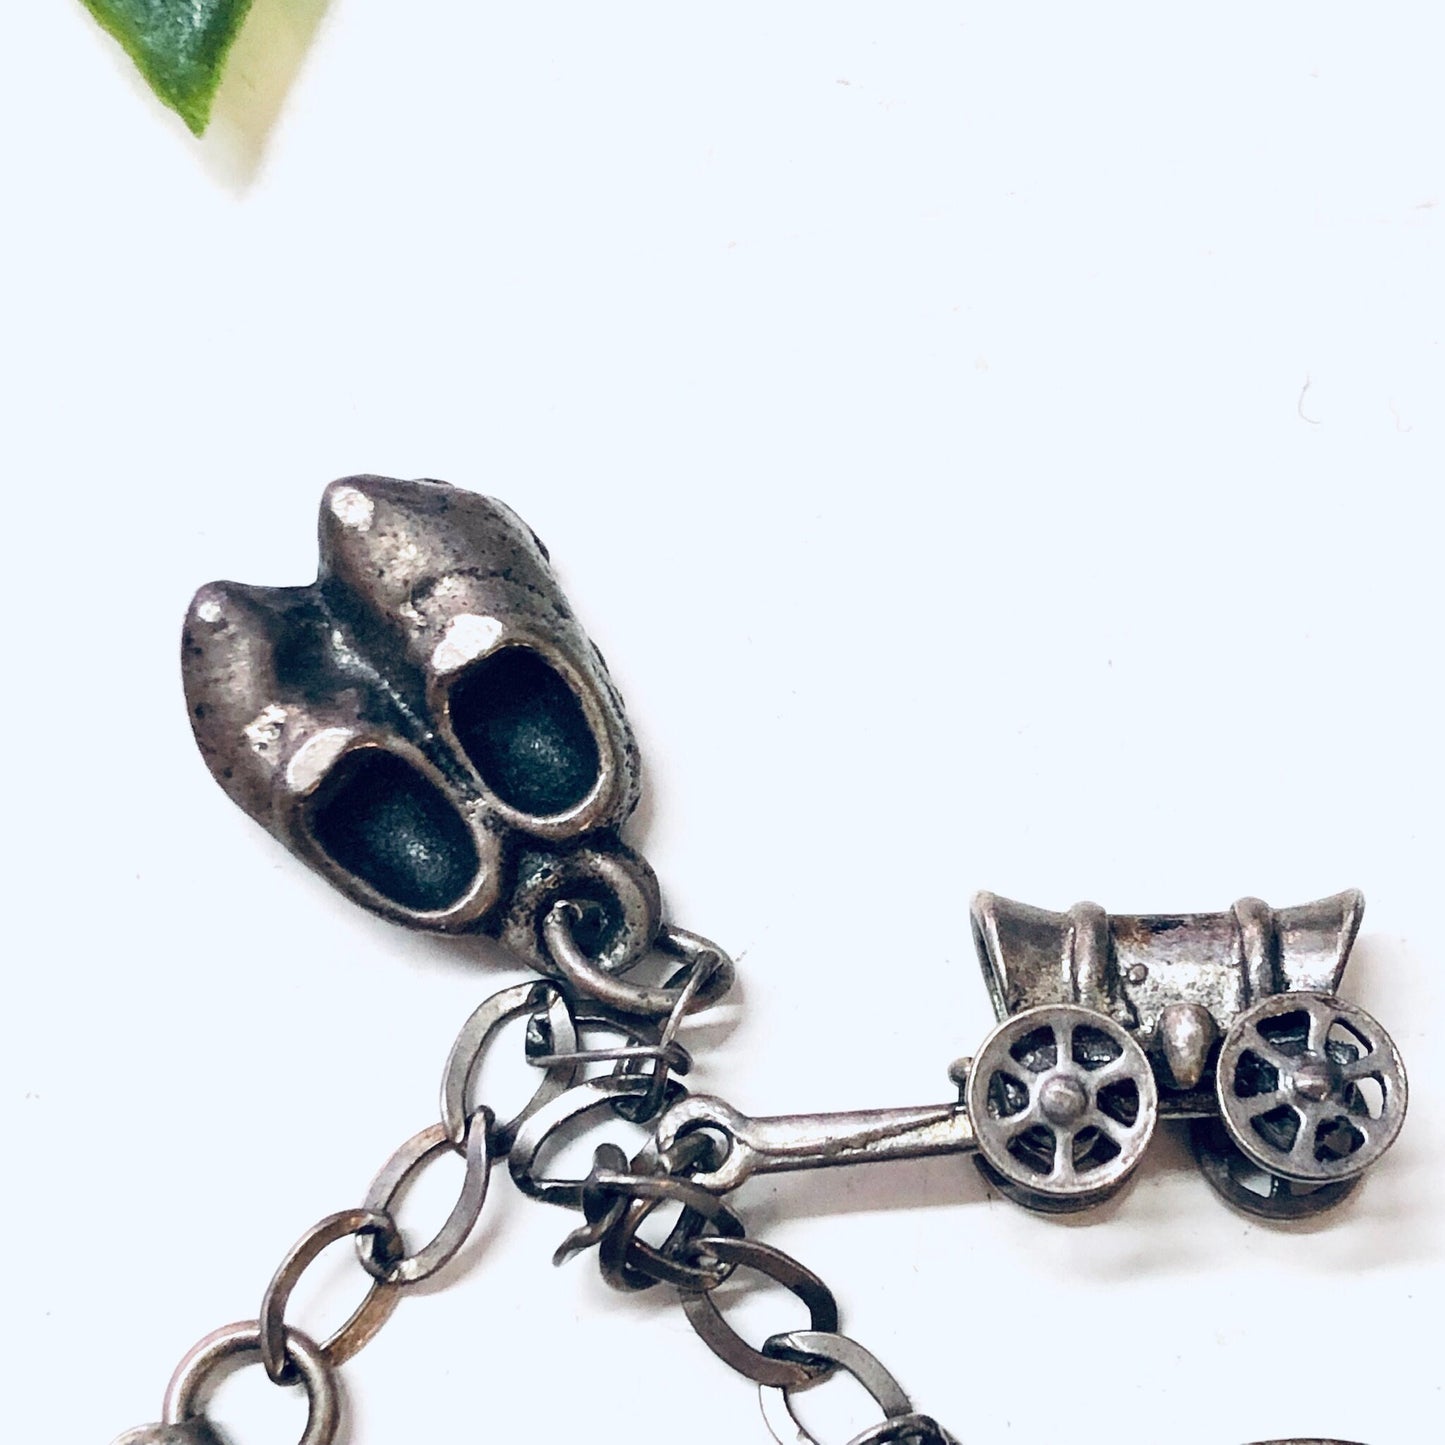 Vintage silver charm bracelet with two adorable shoe charms and a linked chain design, perfect as a Valentine's Day gift or unique accessory for any occasion.